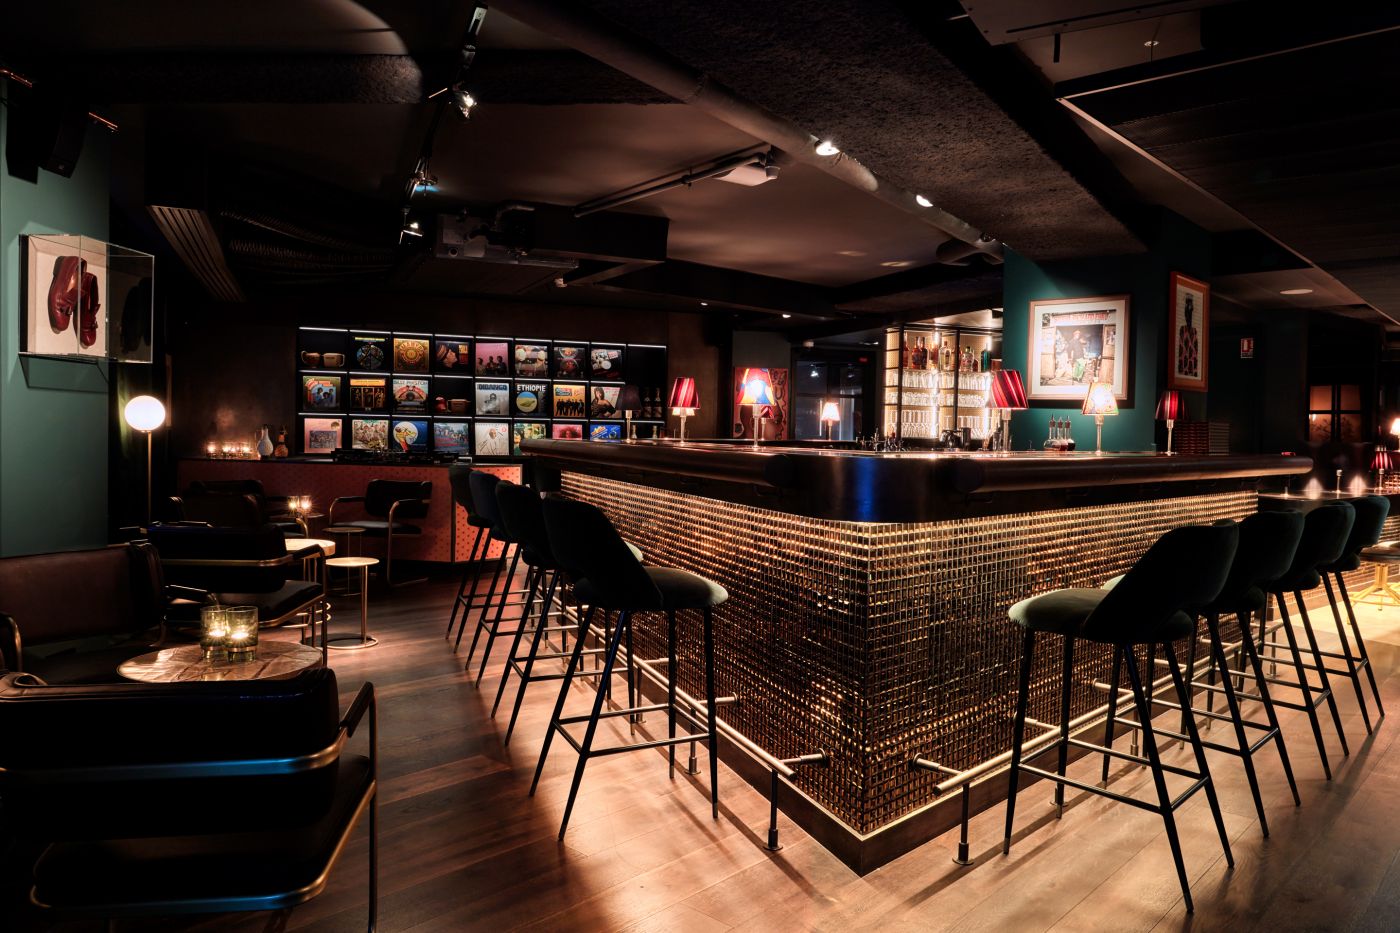 The interior of the Sape Bar, with a DJ booth and several records on the wall as well as a bounter with bar stools